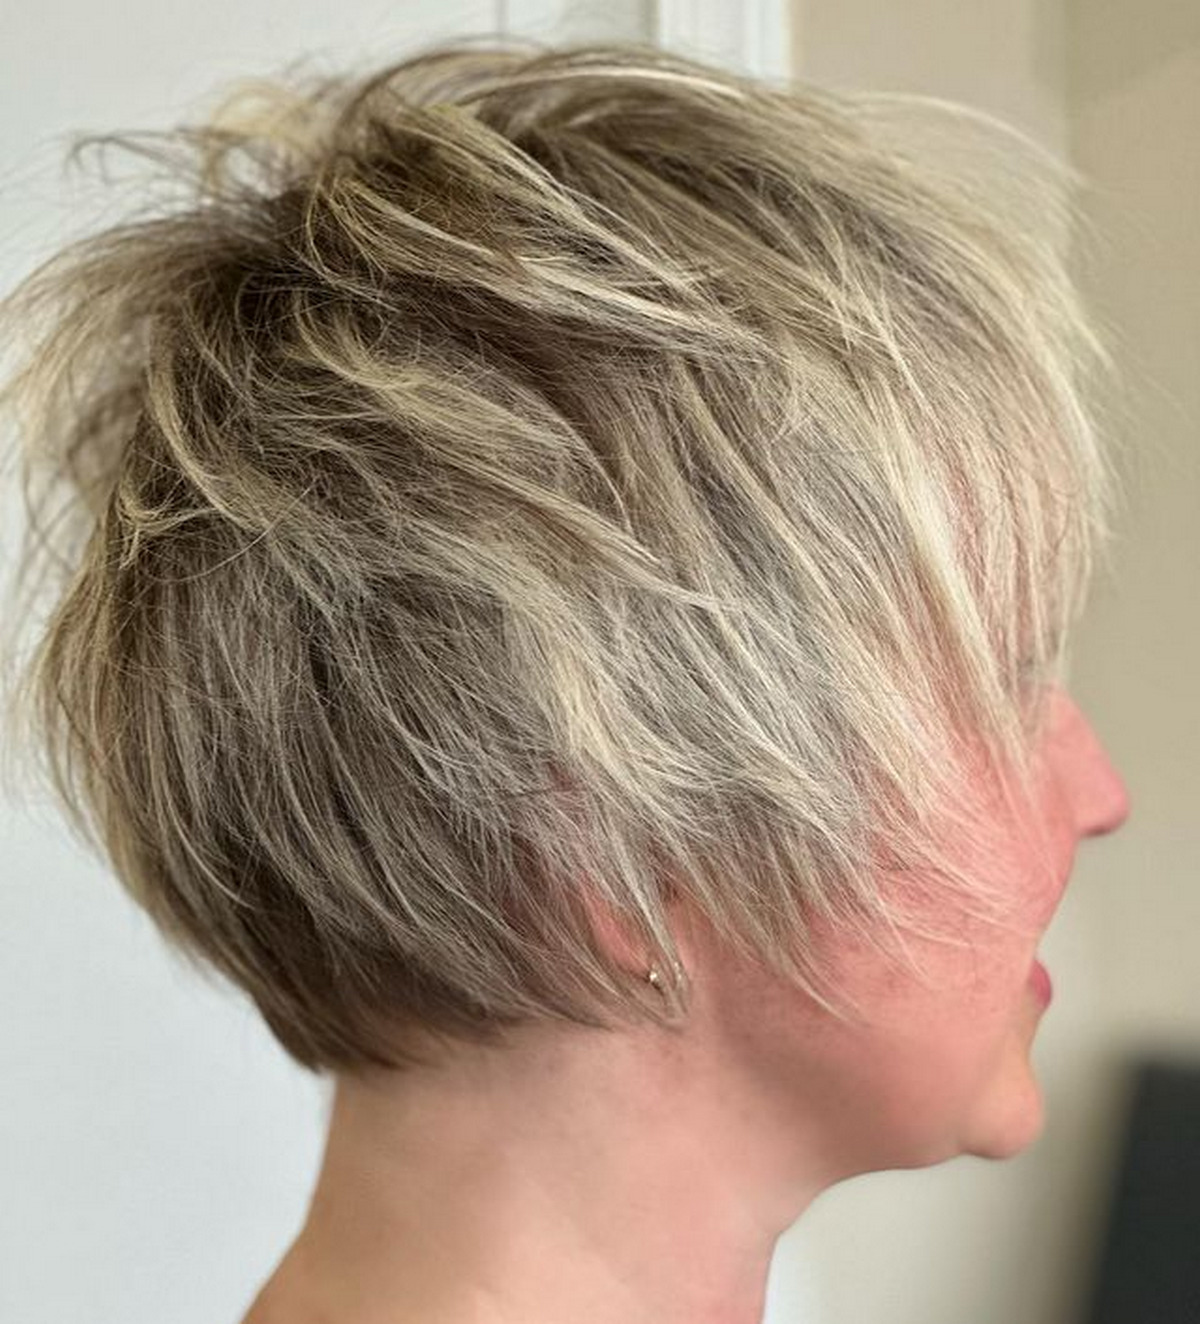 Tapered Textured And Highlighted Pixie